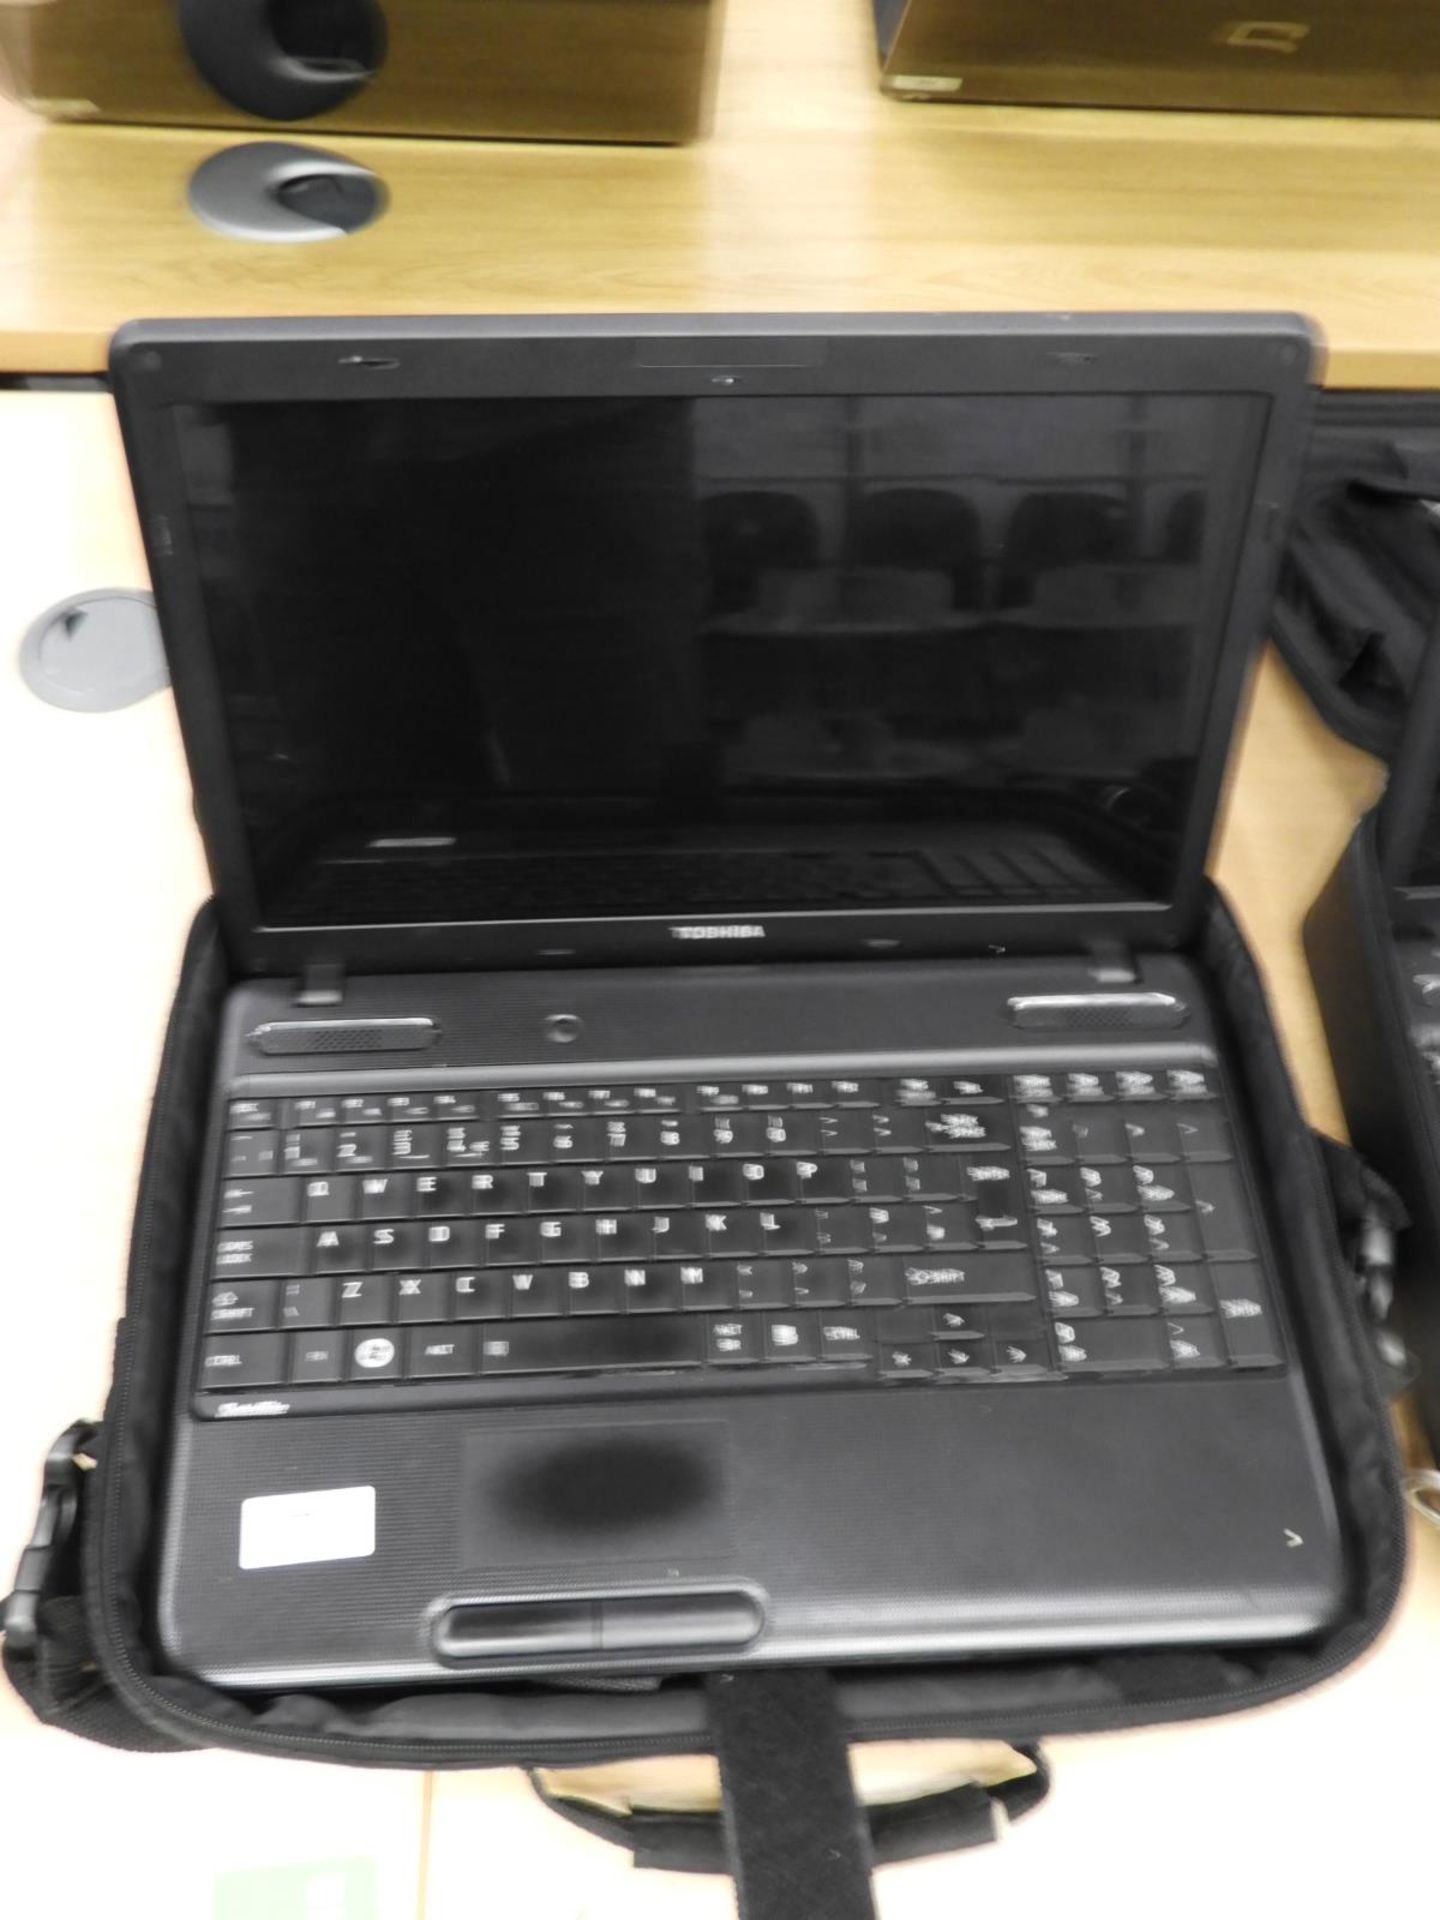 Toshiba Satellite C660-2EF Laptop Computer with Carry Case